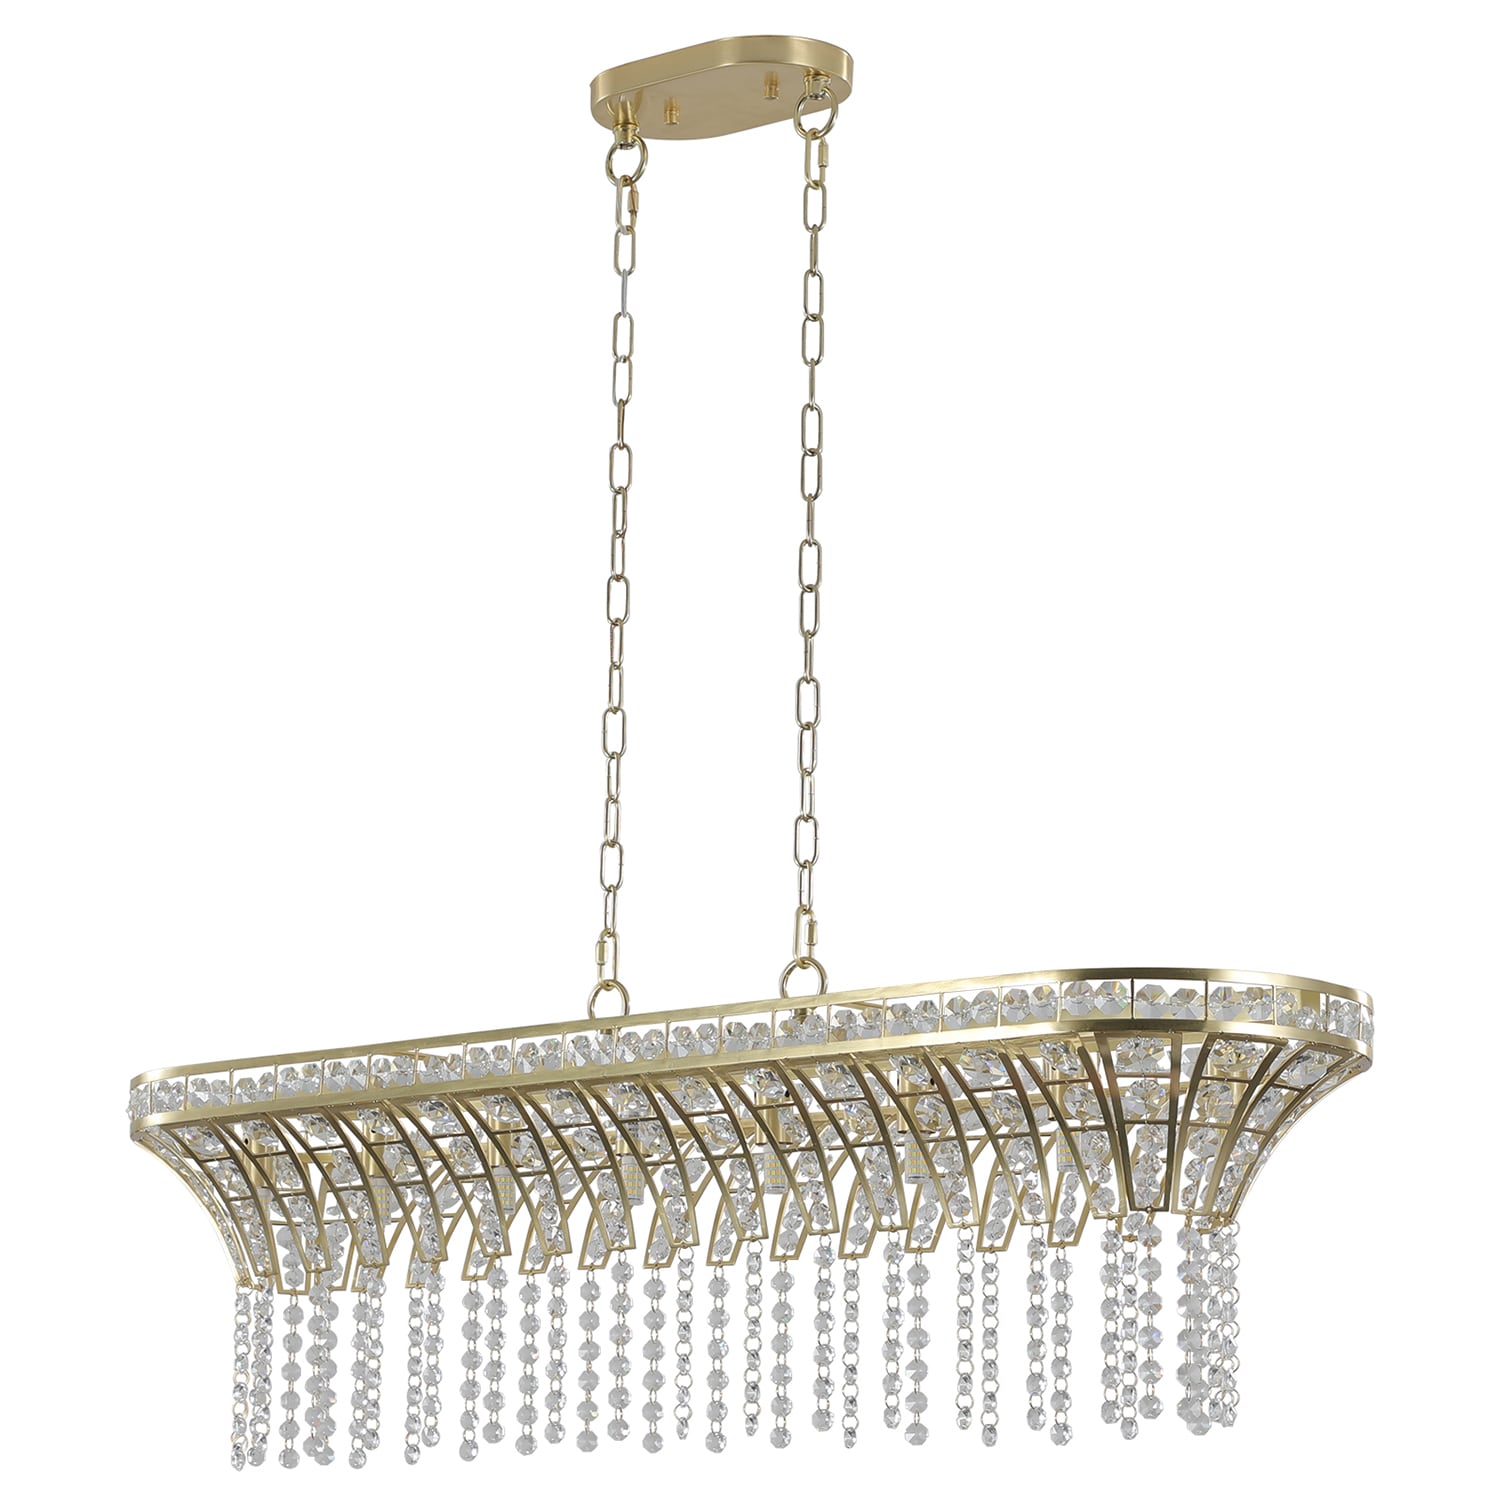 SINOFURN 8-Light Gold Tiffany LED Dry rated Chandelier at Lowes.com